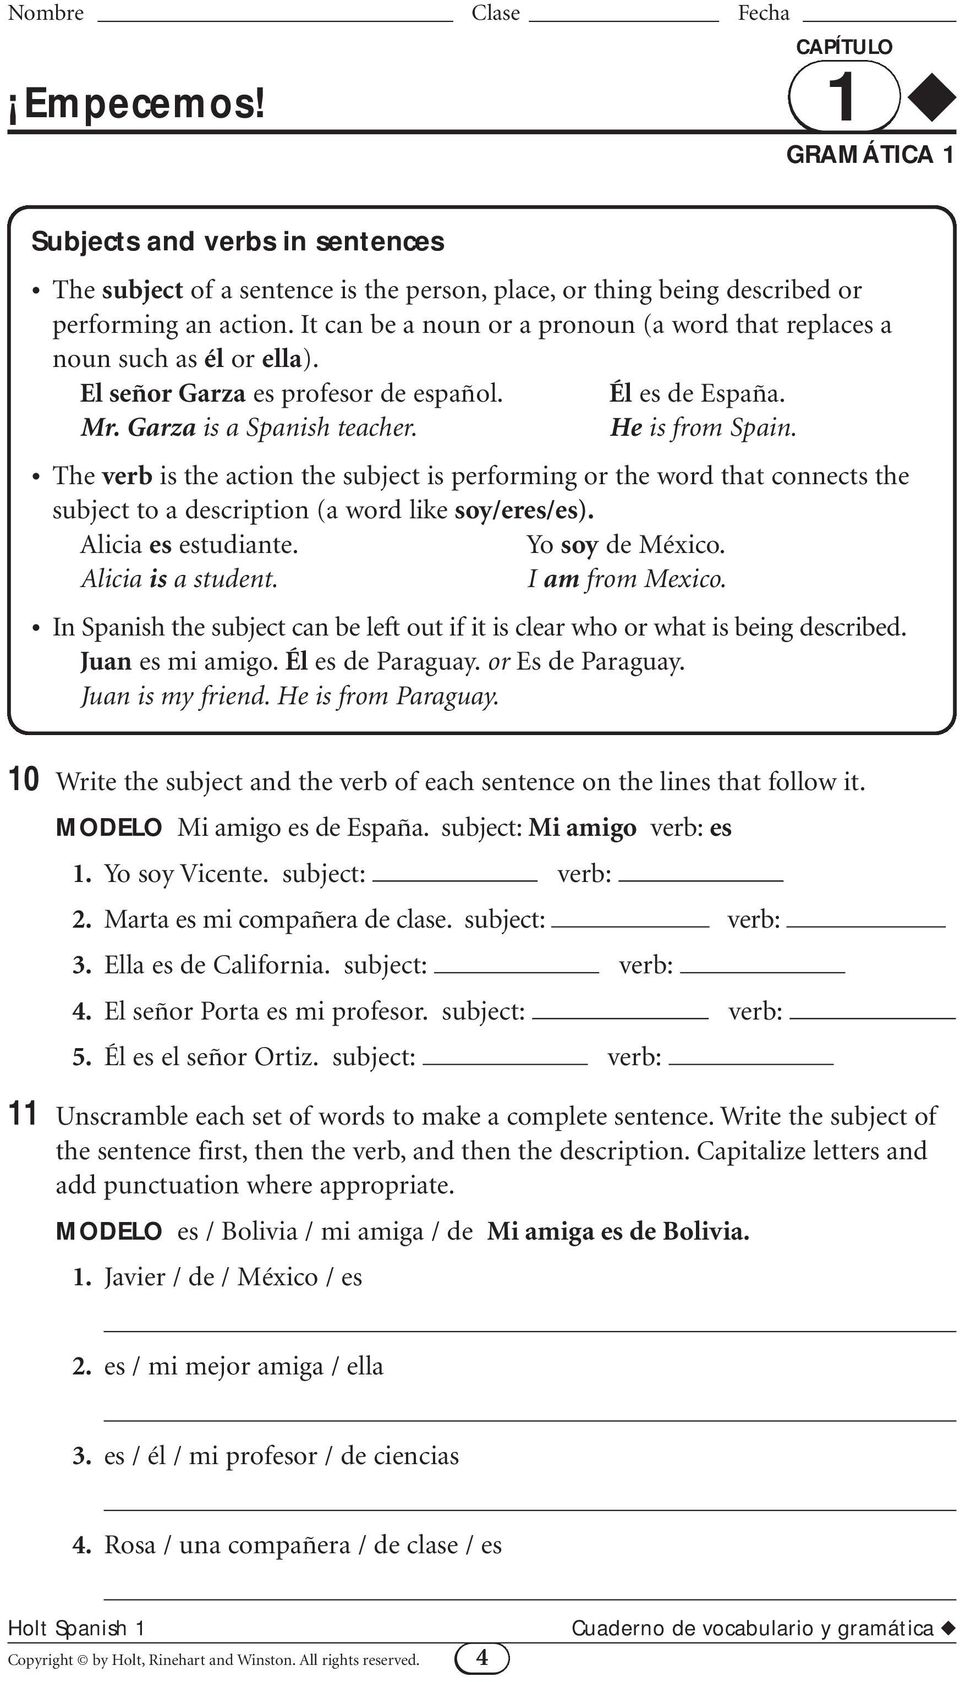 The verb is the action the subject is performing or the word that connects the subject to a description (a word like soy/eres/es). Alicia es estudiante. Yo soy de México. Alicia is a student.